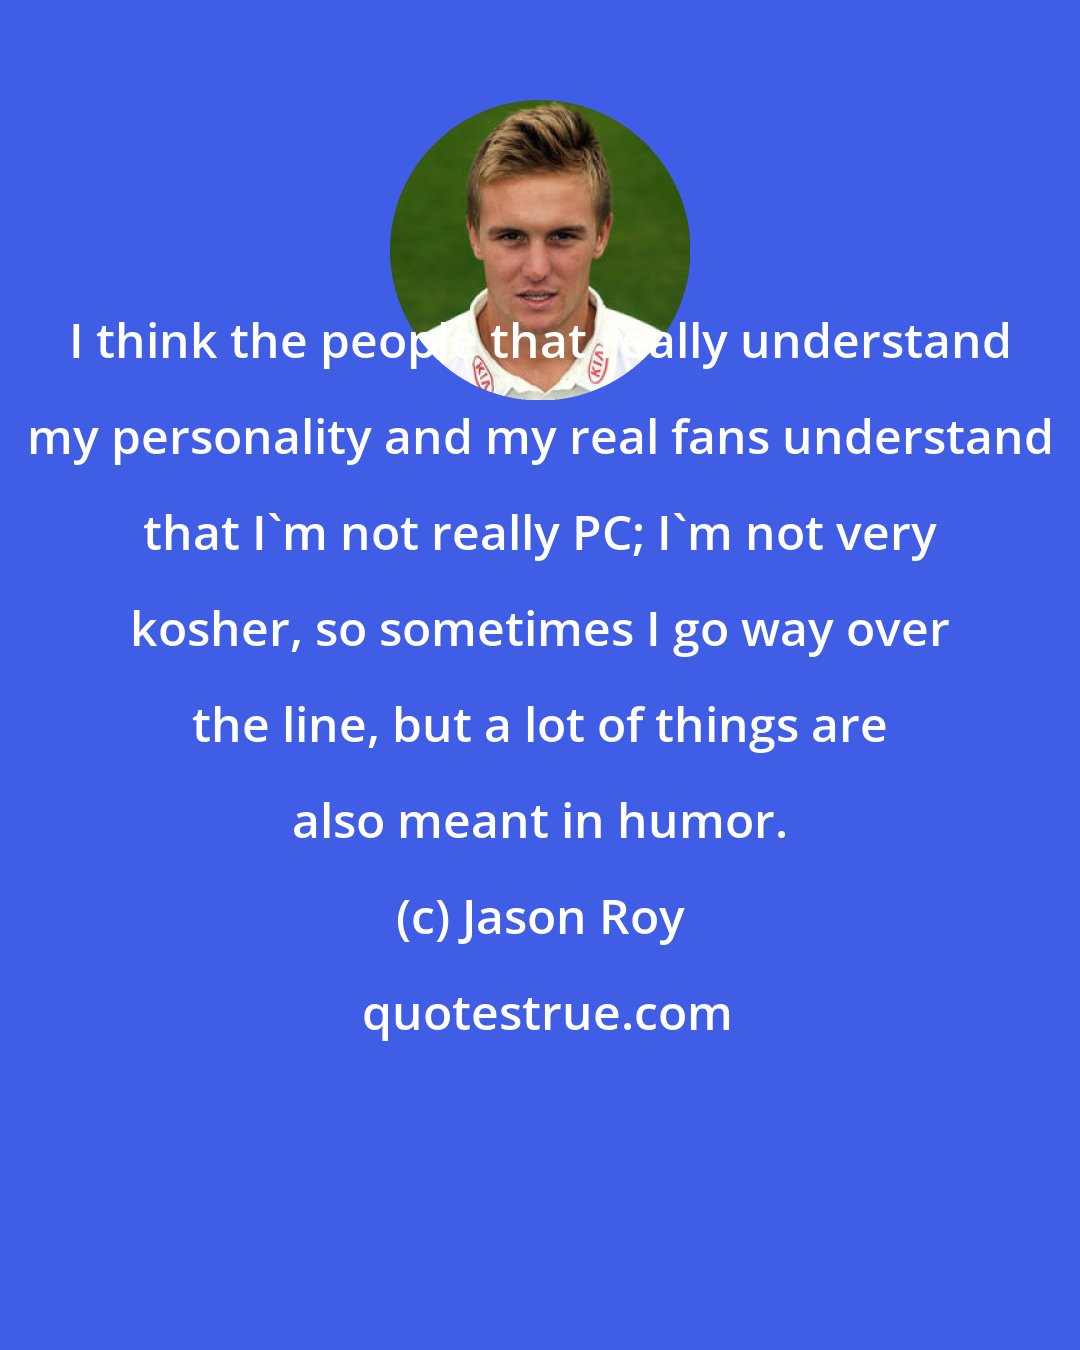 Jason Roy: I think the people that really understand my personality and my real fans understand that I'm not really PC; I'm not very kosher, so sometimes I go way over the line, but a lot of things are also meant in humor.